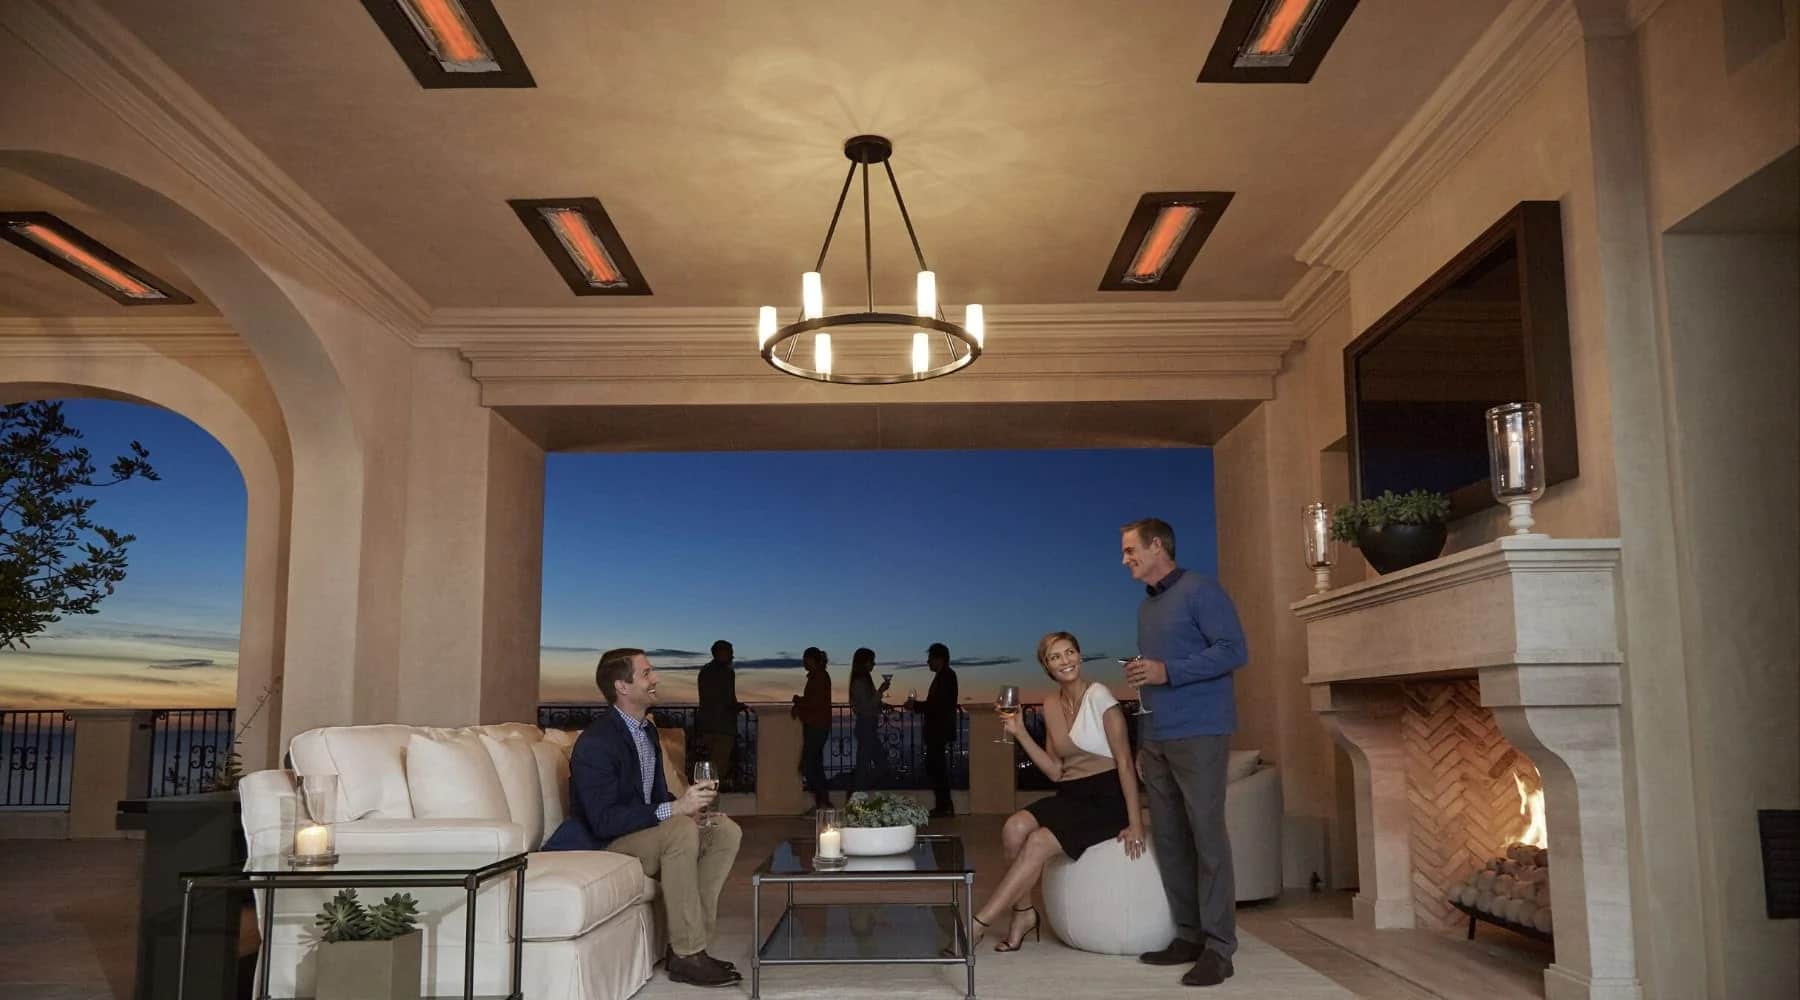 How to Choose the Best Electric Patio Heater?